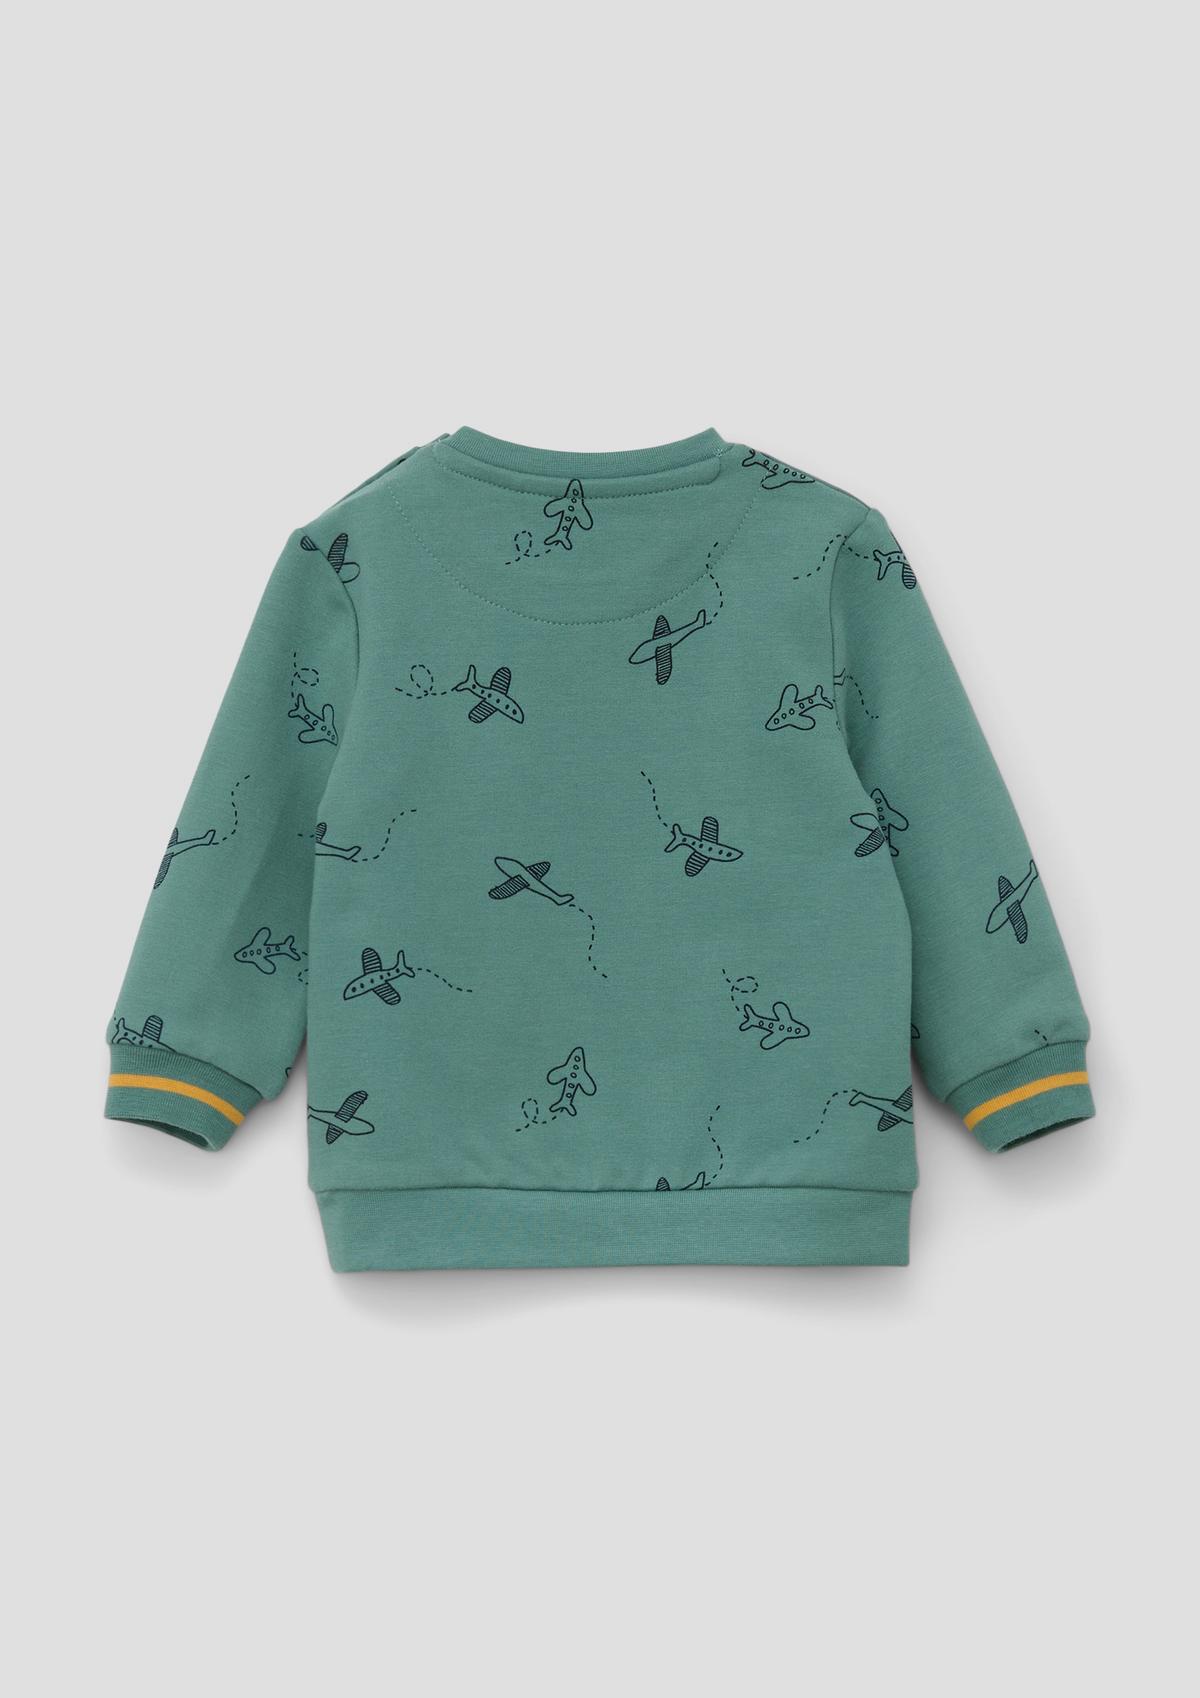 s.Oliver Sweatshirt with a check pattern